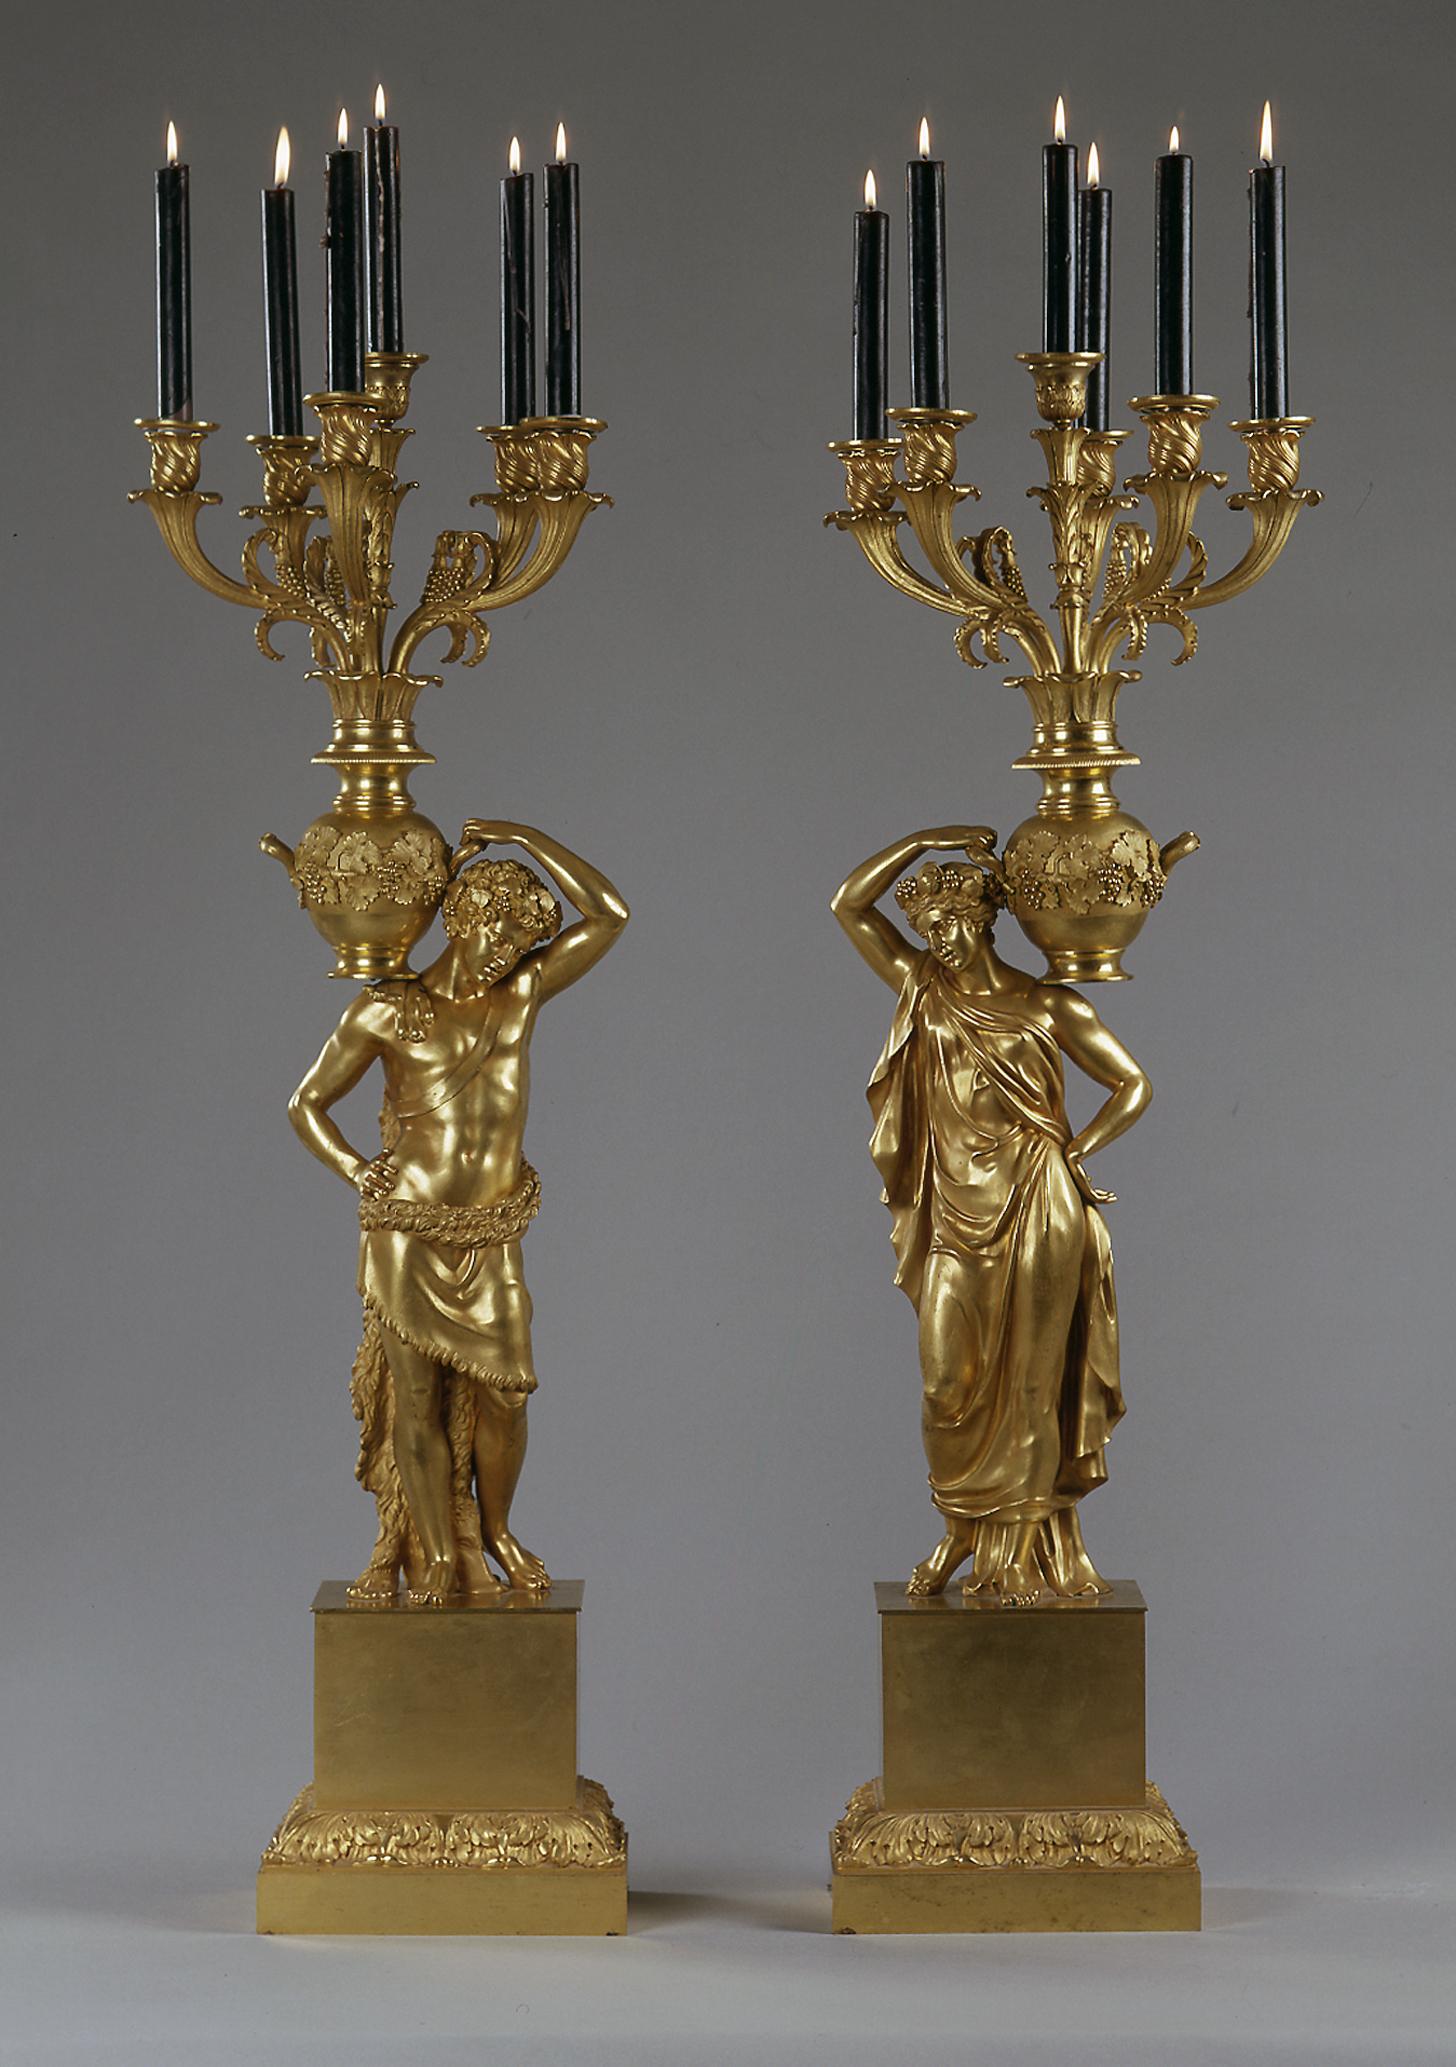 A magnificent and highly important pair of gilt bronze figural empire period candelabra.

French, circa 1815.

A Magnificent and Highly Important Pair of gilt bronze Figural Empire Period Candelabra. The Candelabra take the form of a male and